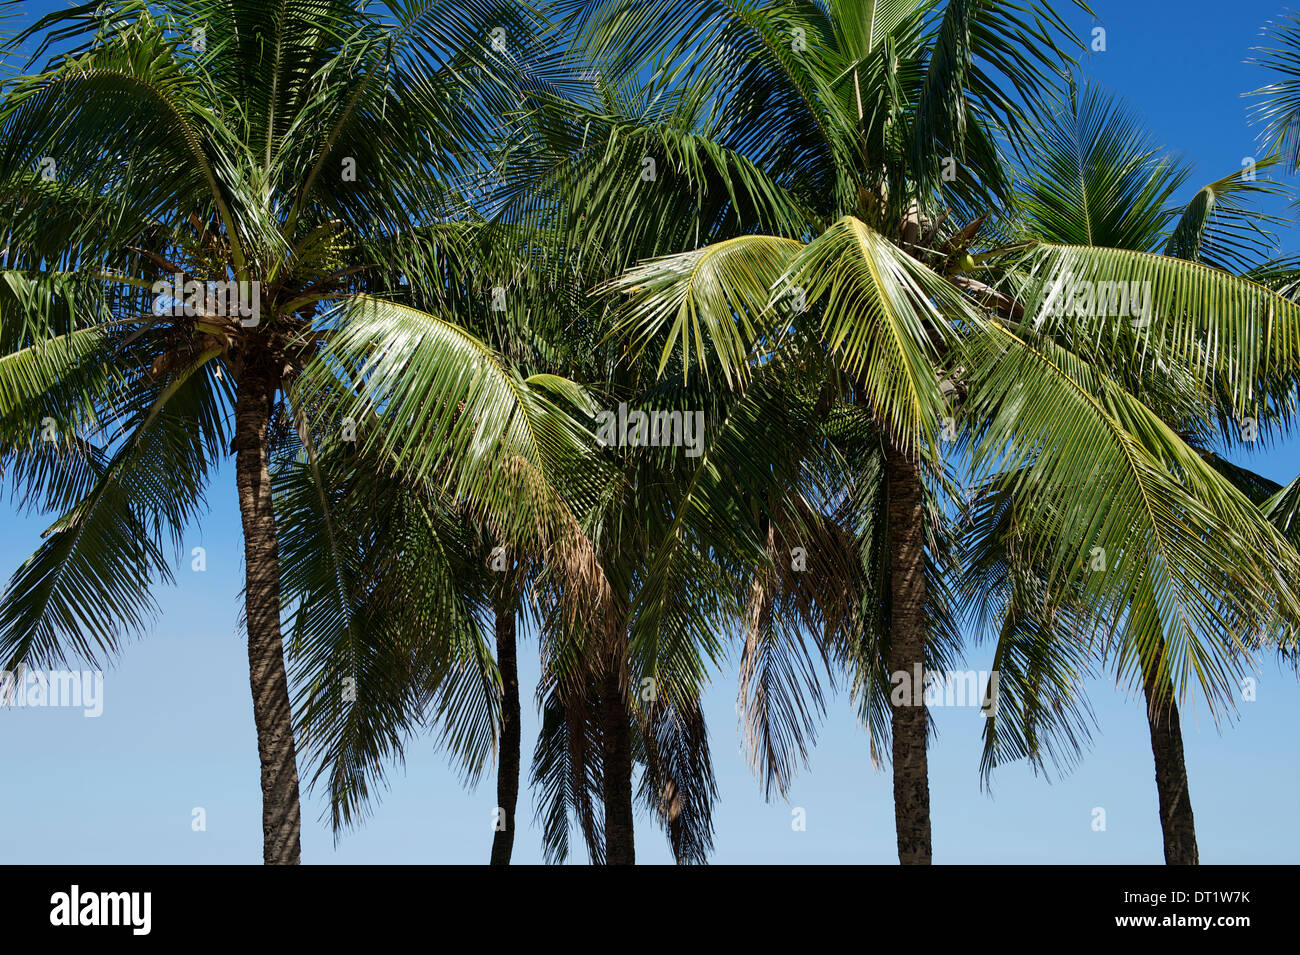 Fresh green coconut palm trees in a row against bright blue tropical sky Stock Photo